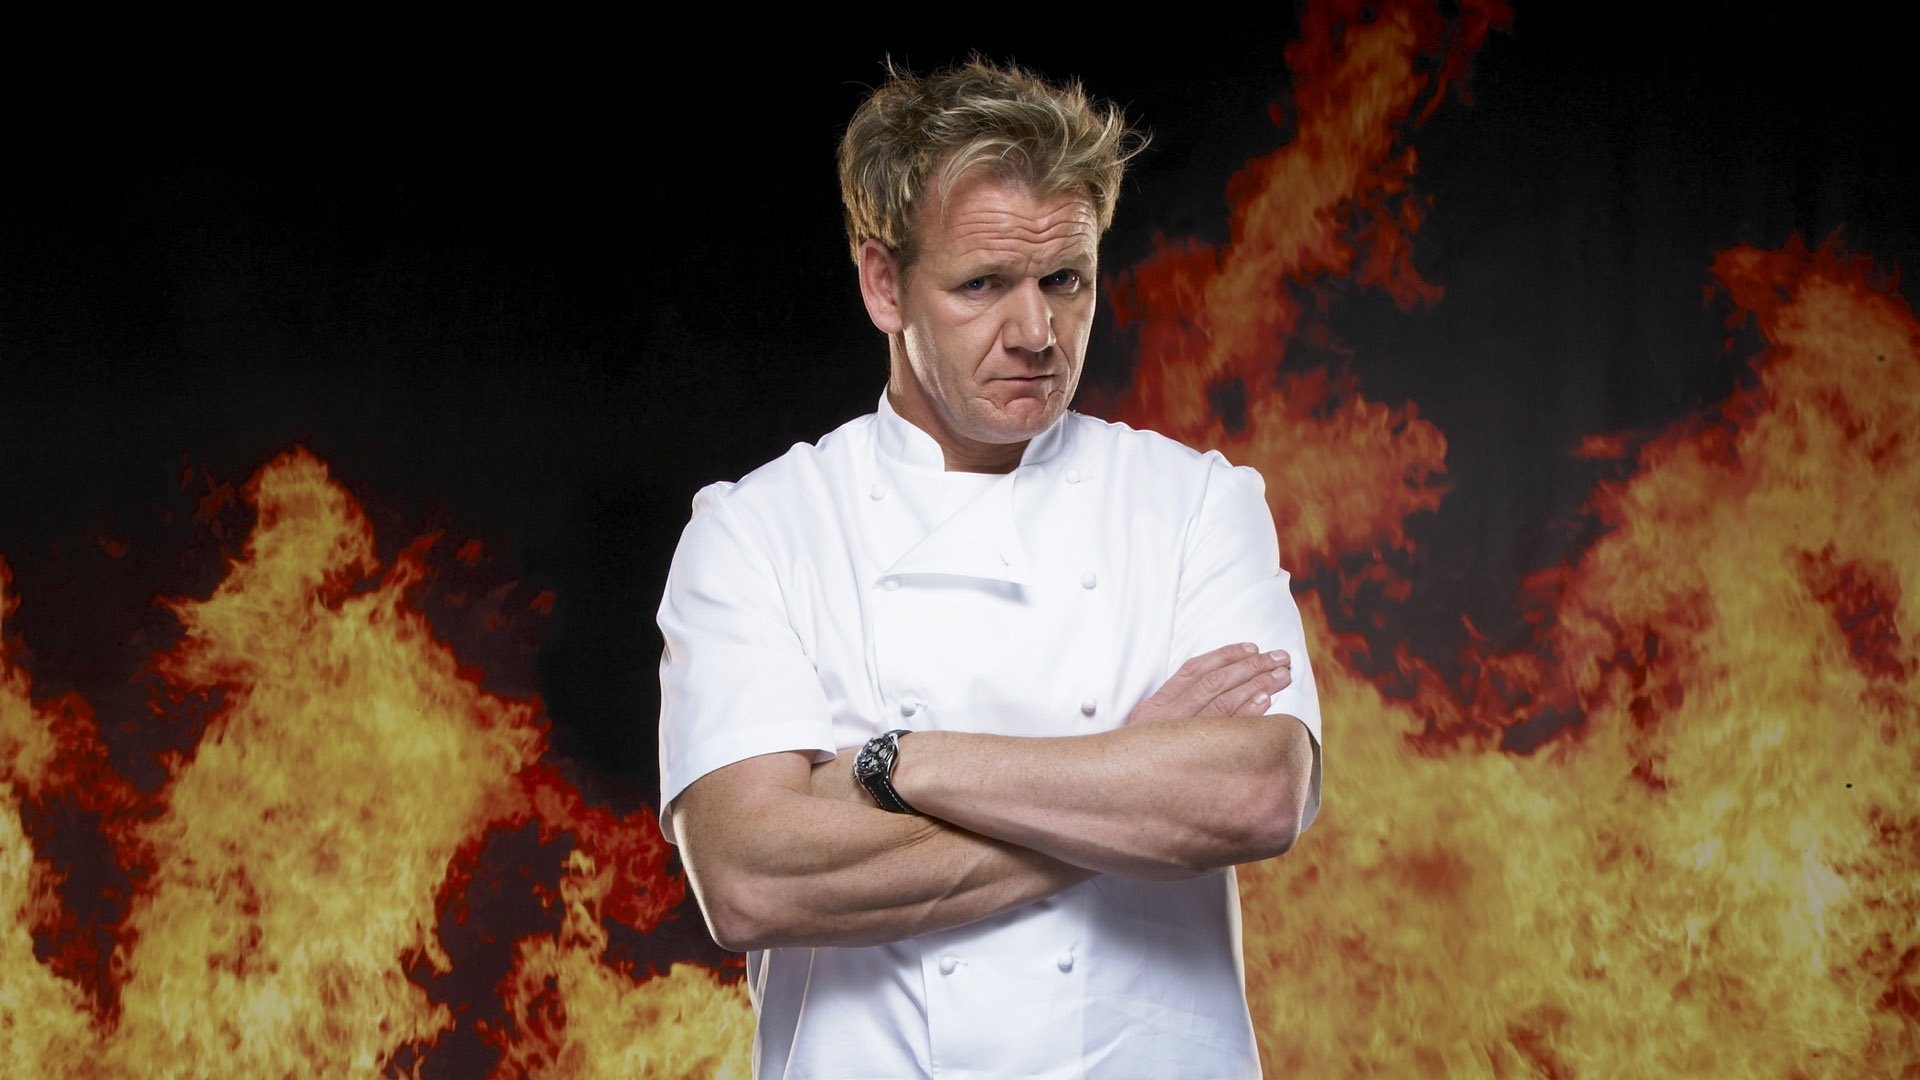 Gordon Ramsay: Opened a chain of restaurants inspired by the show Hell's Kitchen. 1920x1080 Full HD Wallpaper.